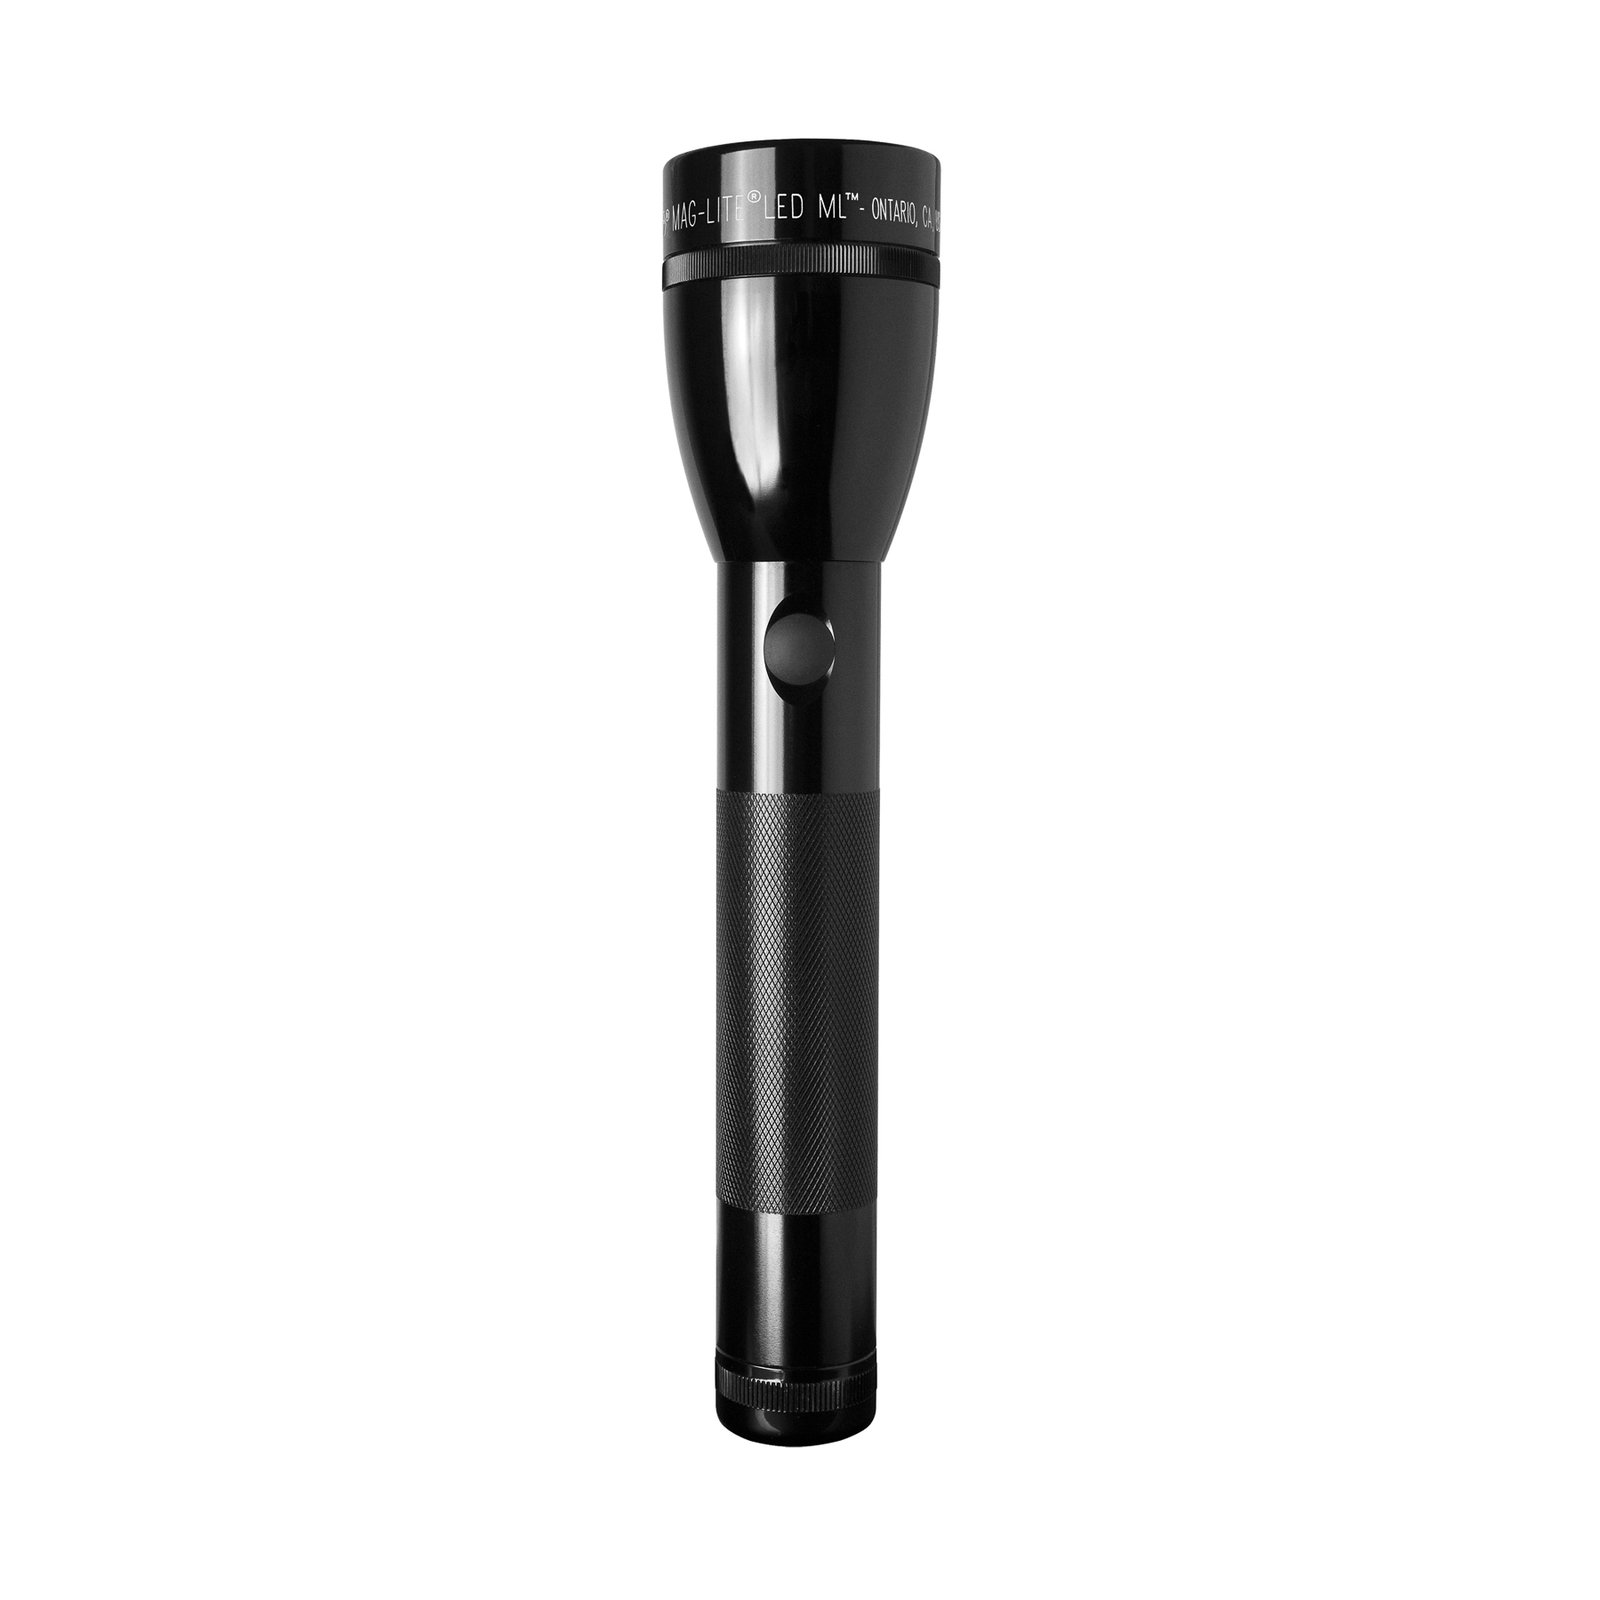 Maglite LED torch ML100, 2-Cell C, black